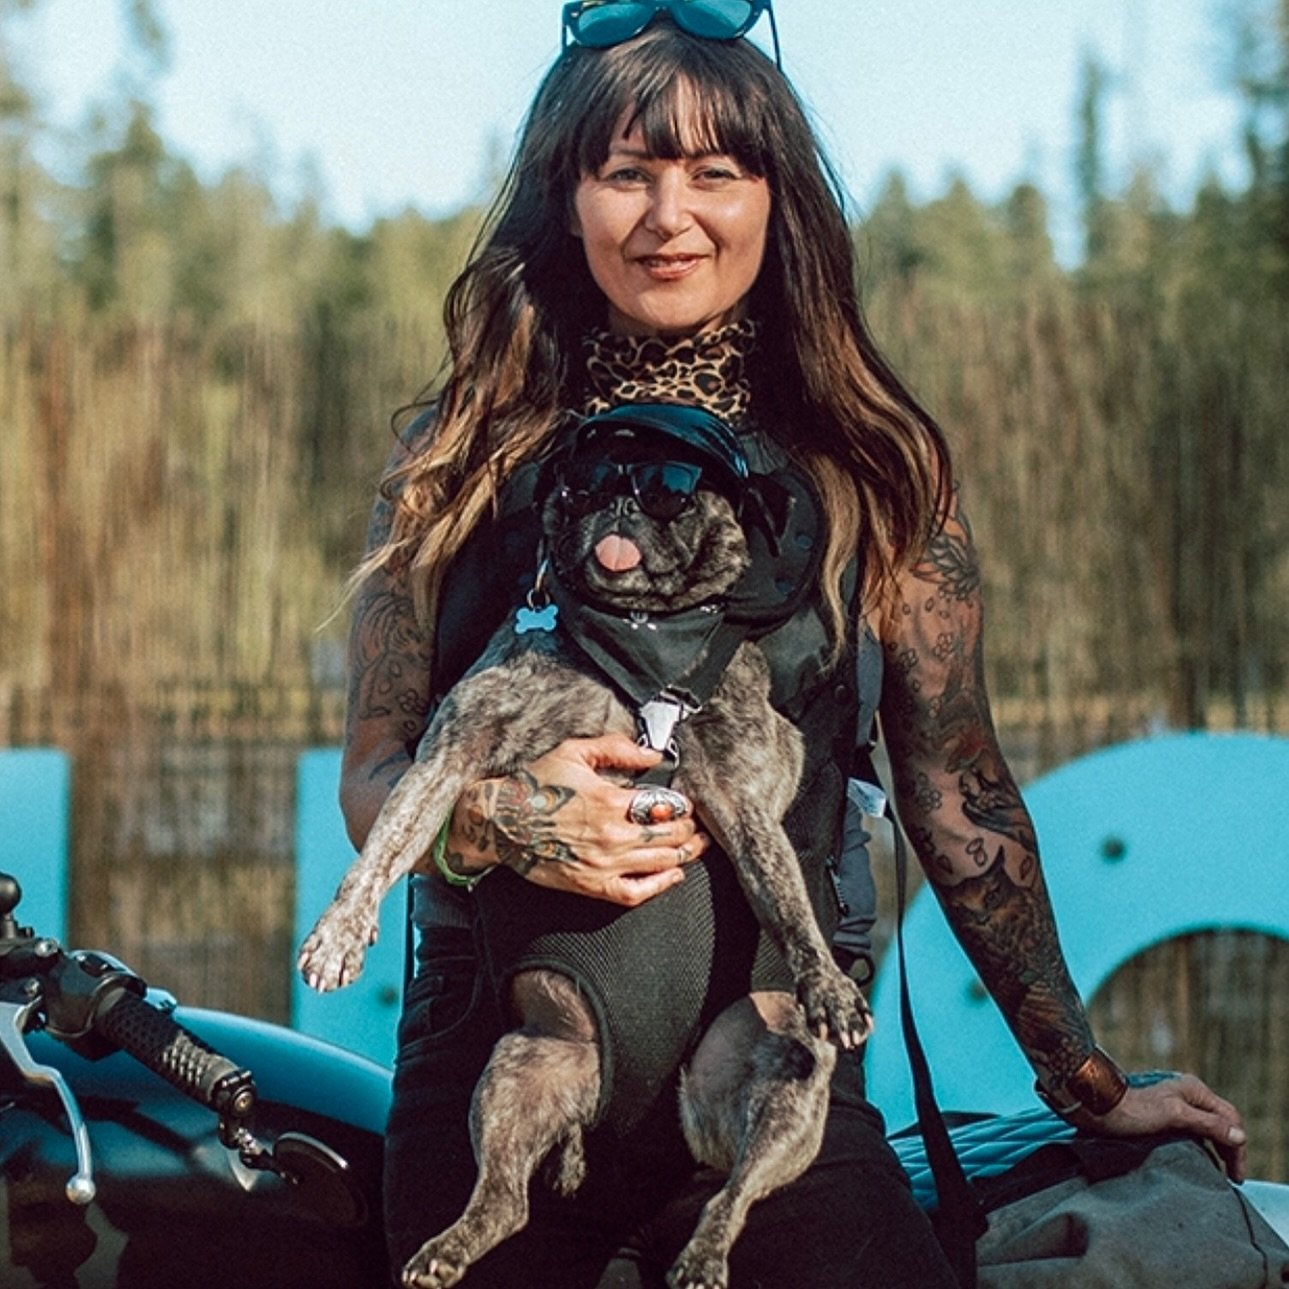 ✨Hey it&rsquo;s me!✨
And my sidekick Ezme, of course. Thought I&rsquo;d post this today for comedic relief -and to reintroduce myself to anyone new here. 
I&rsquo;m Dawndra, dog and cat mom. Motorcycle lover. Adventure seeker. Earth worshipper. Plant